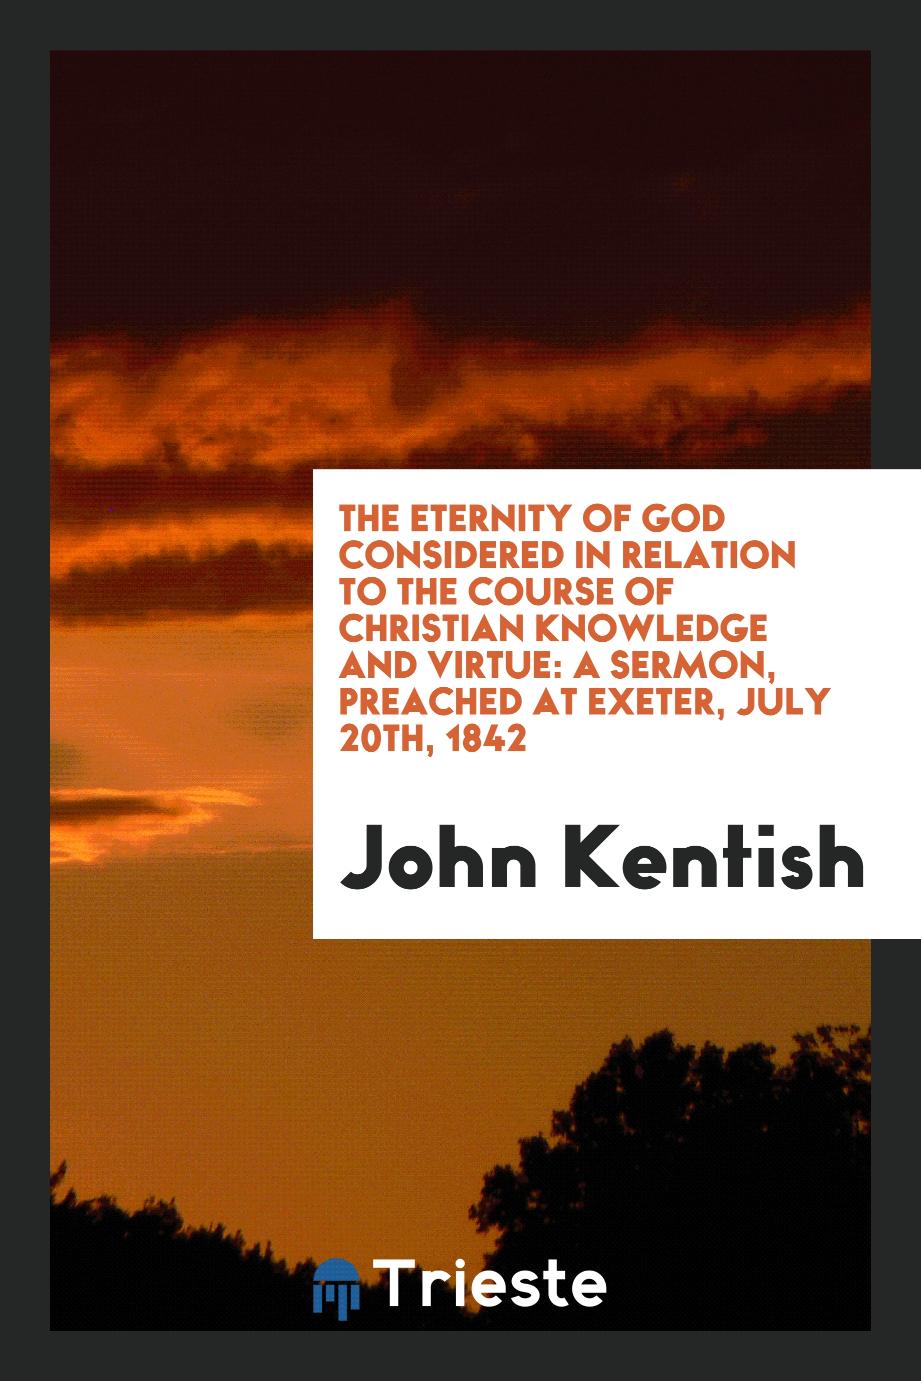 The Eternity of God Considered in Relation to the Course of Christian Knowledge and Virtue: A Sermon, preached at exeter, July 20th, 1842